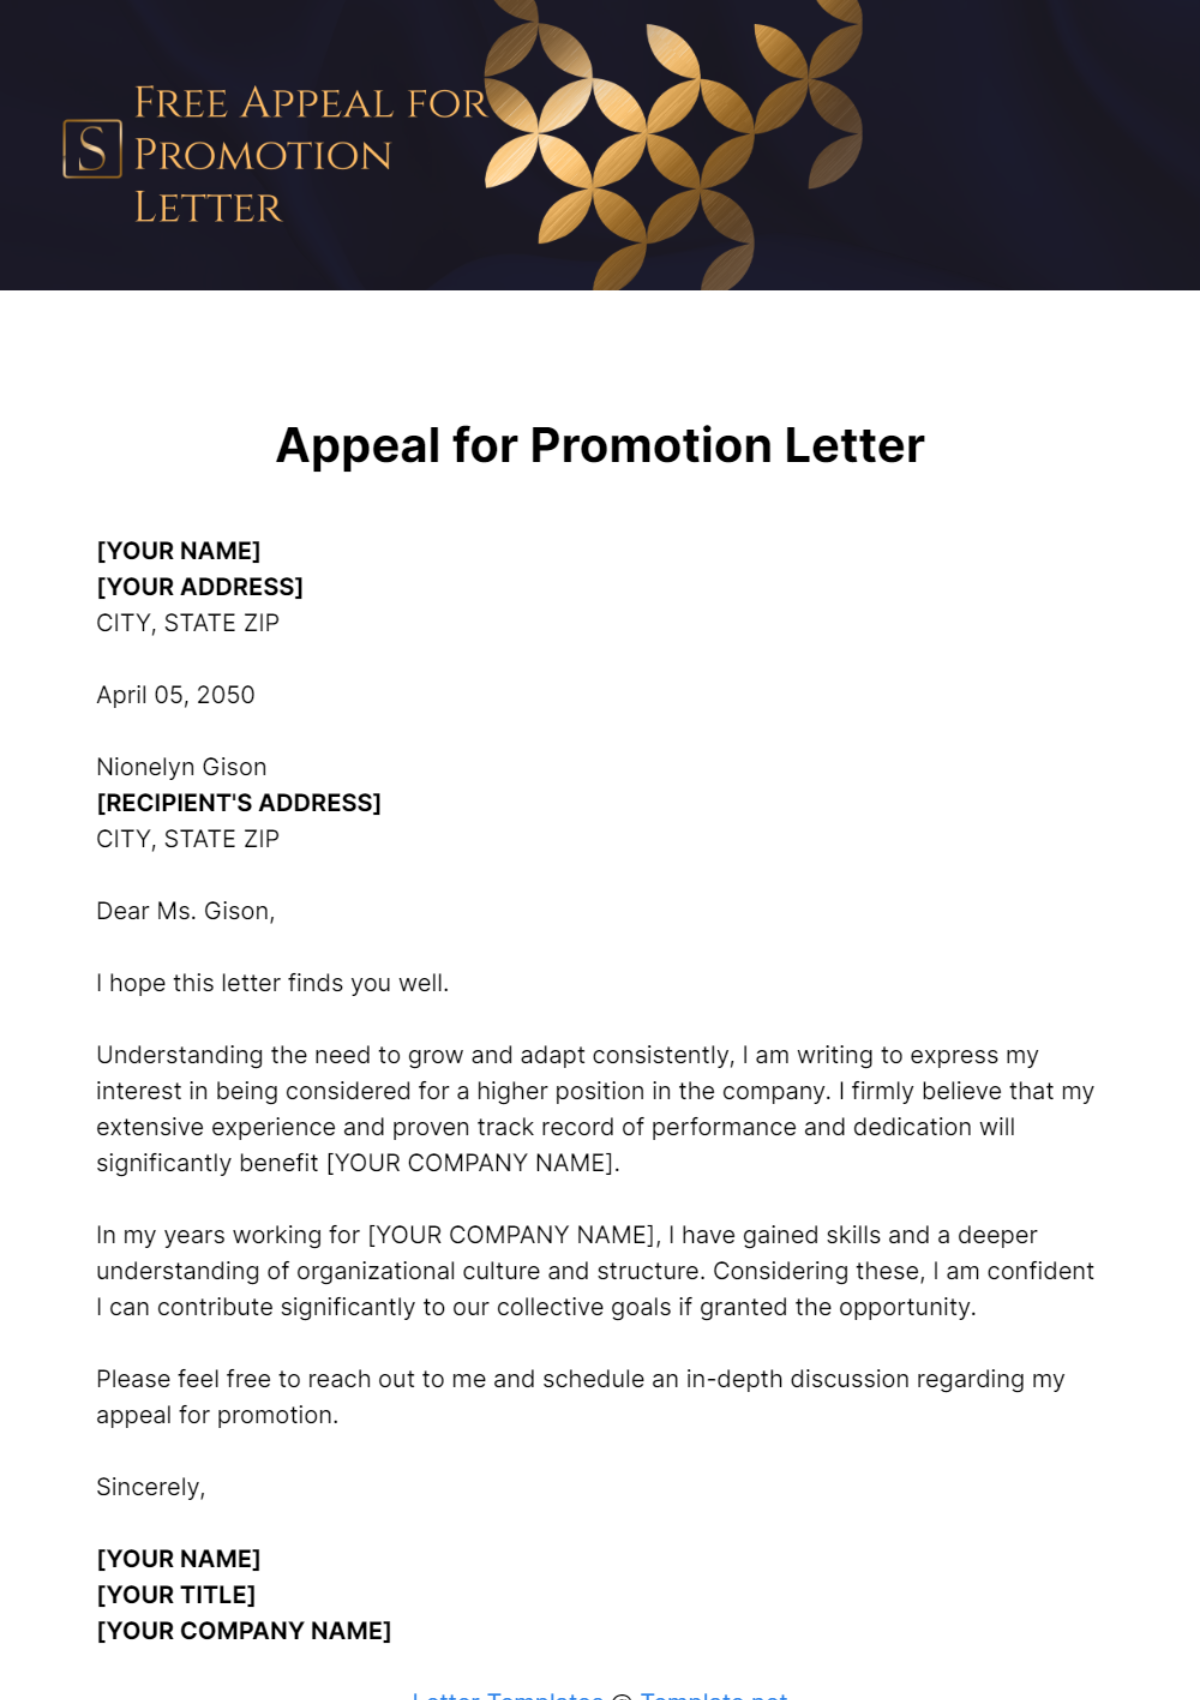 Appeal for Promotion Letter Template